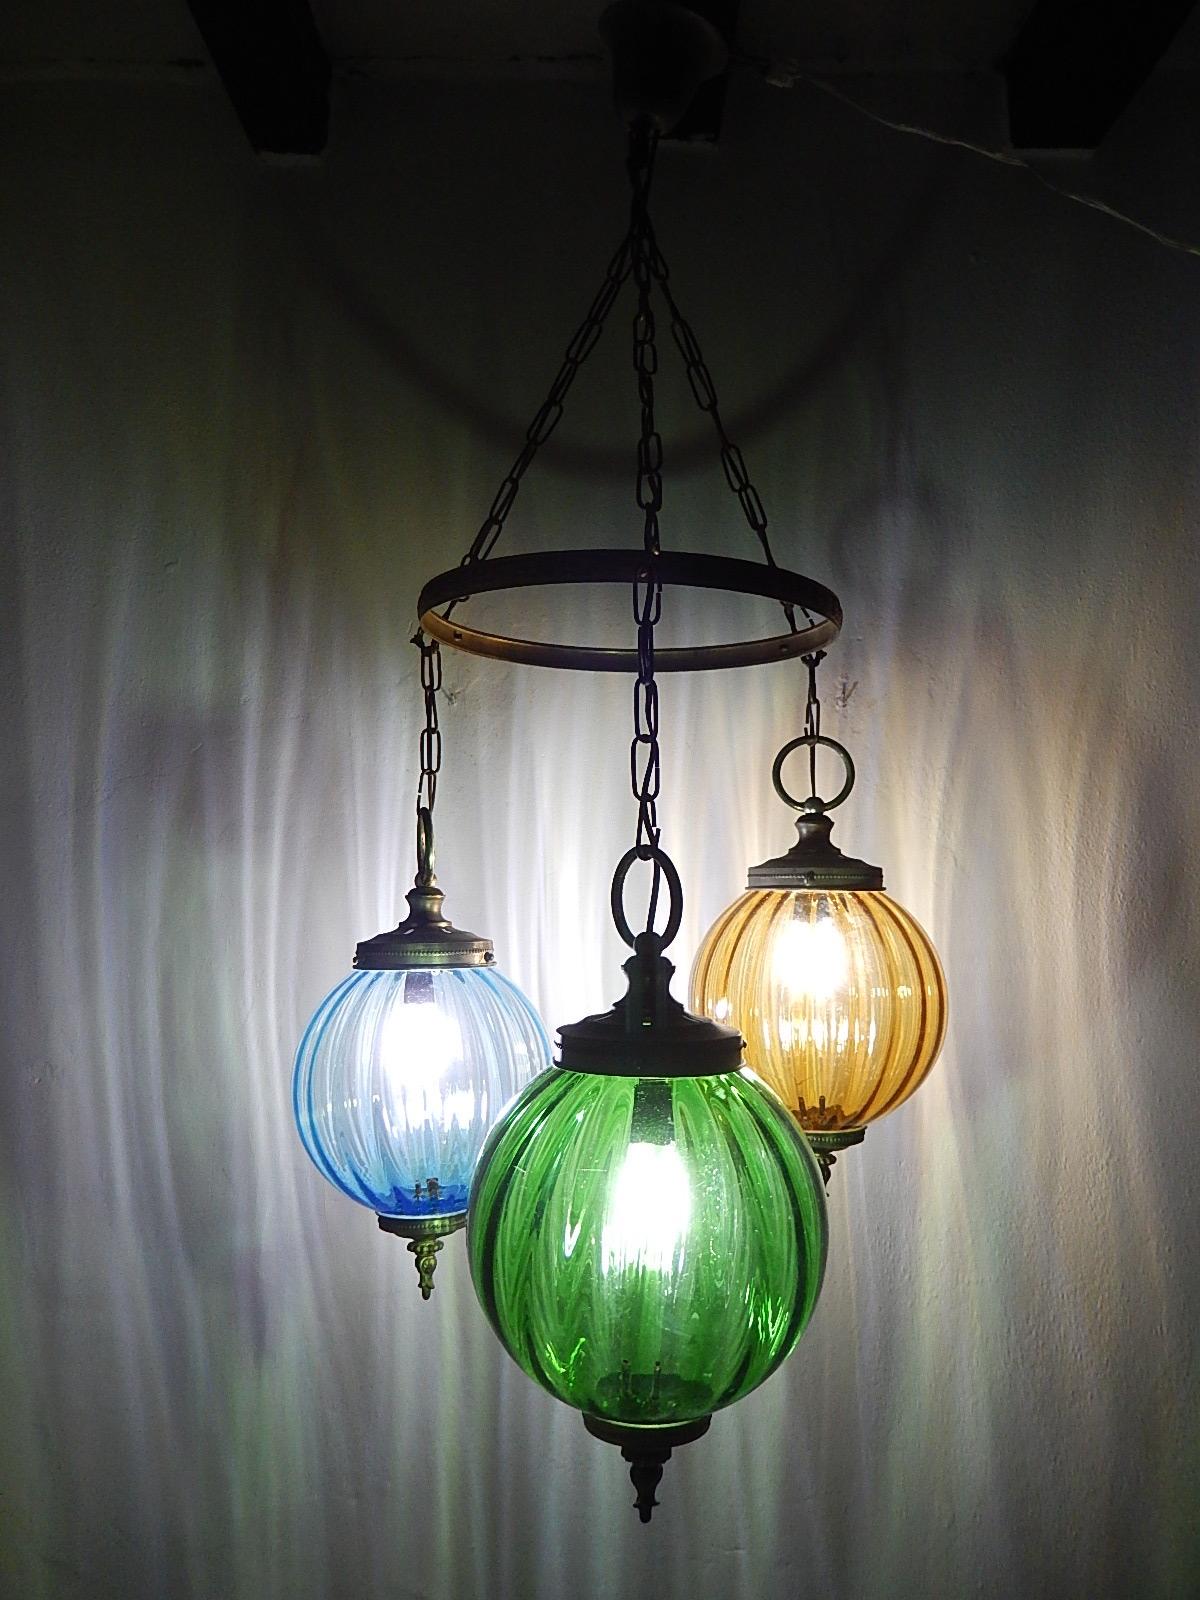 Housing one-light each. Rare blue, yellow and green Murano blown glass globes. Great detailed brass craftsmanship. Will be re-wired with certified appropriate sockets for country and ready to hang. Free priority UPS shipping from Italy, no custom